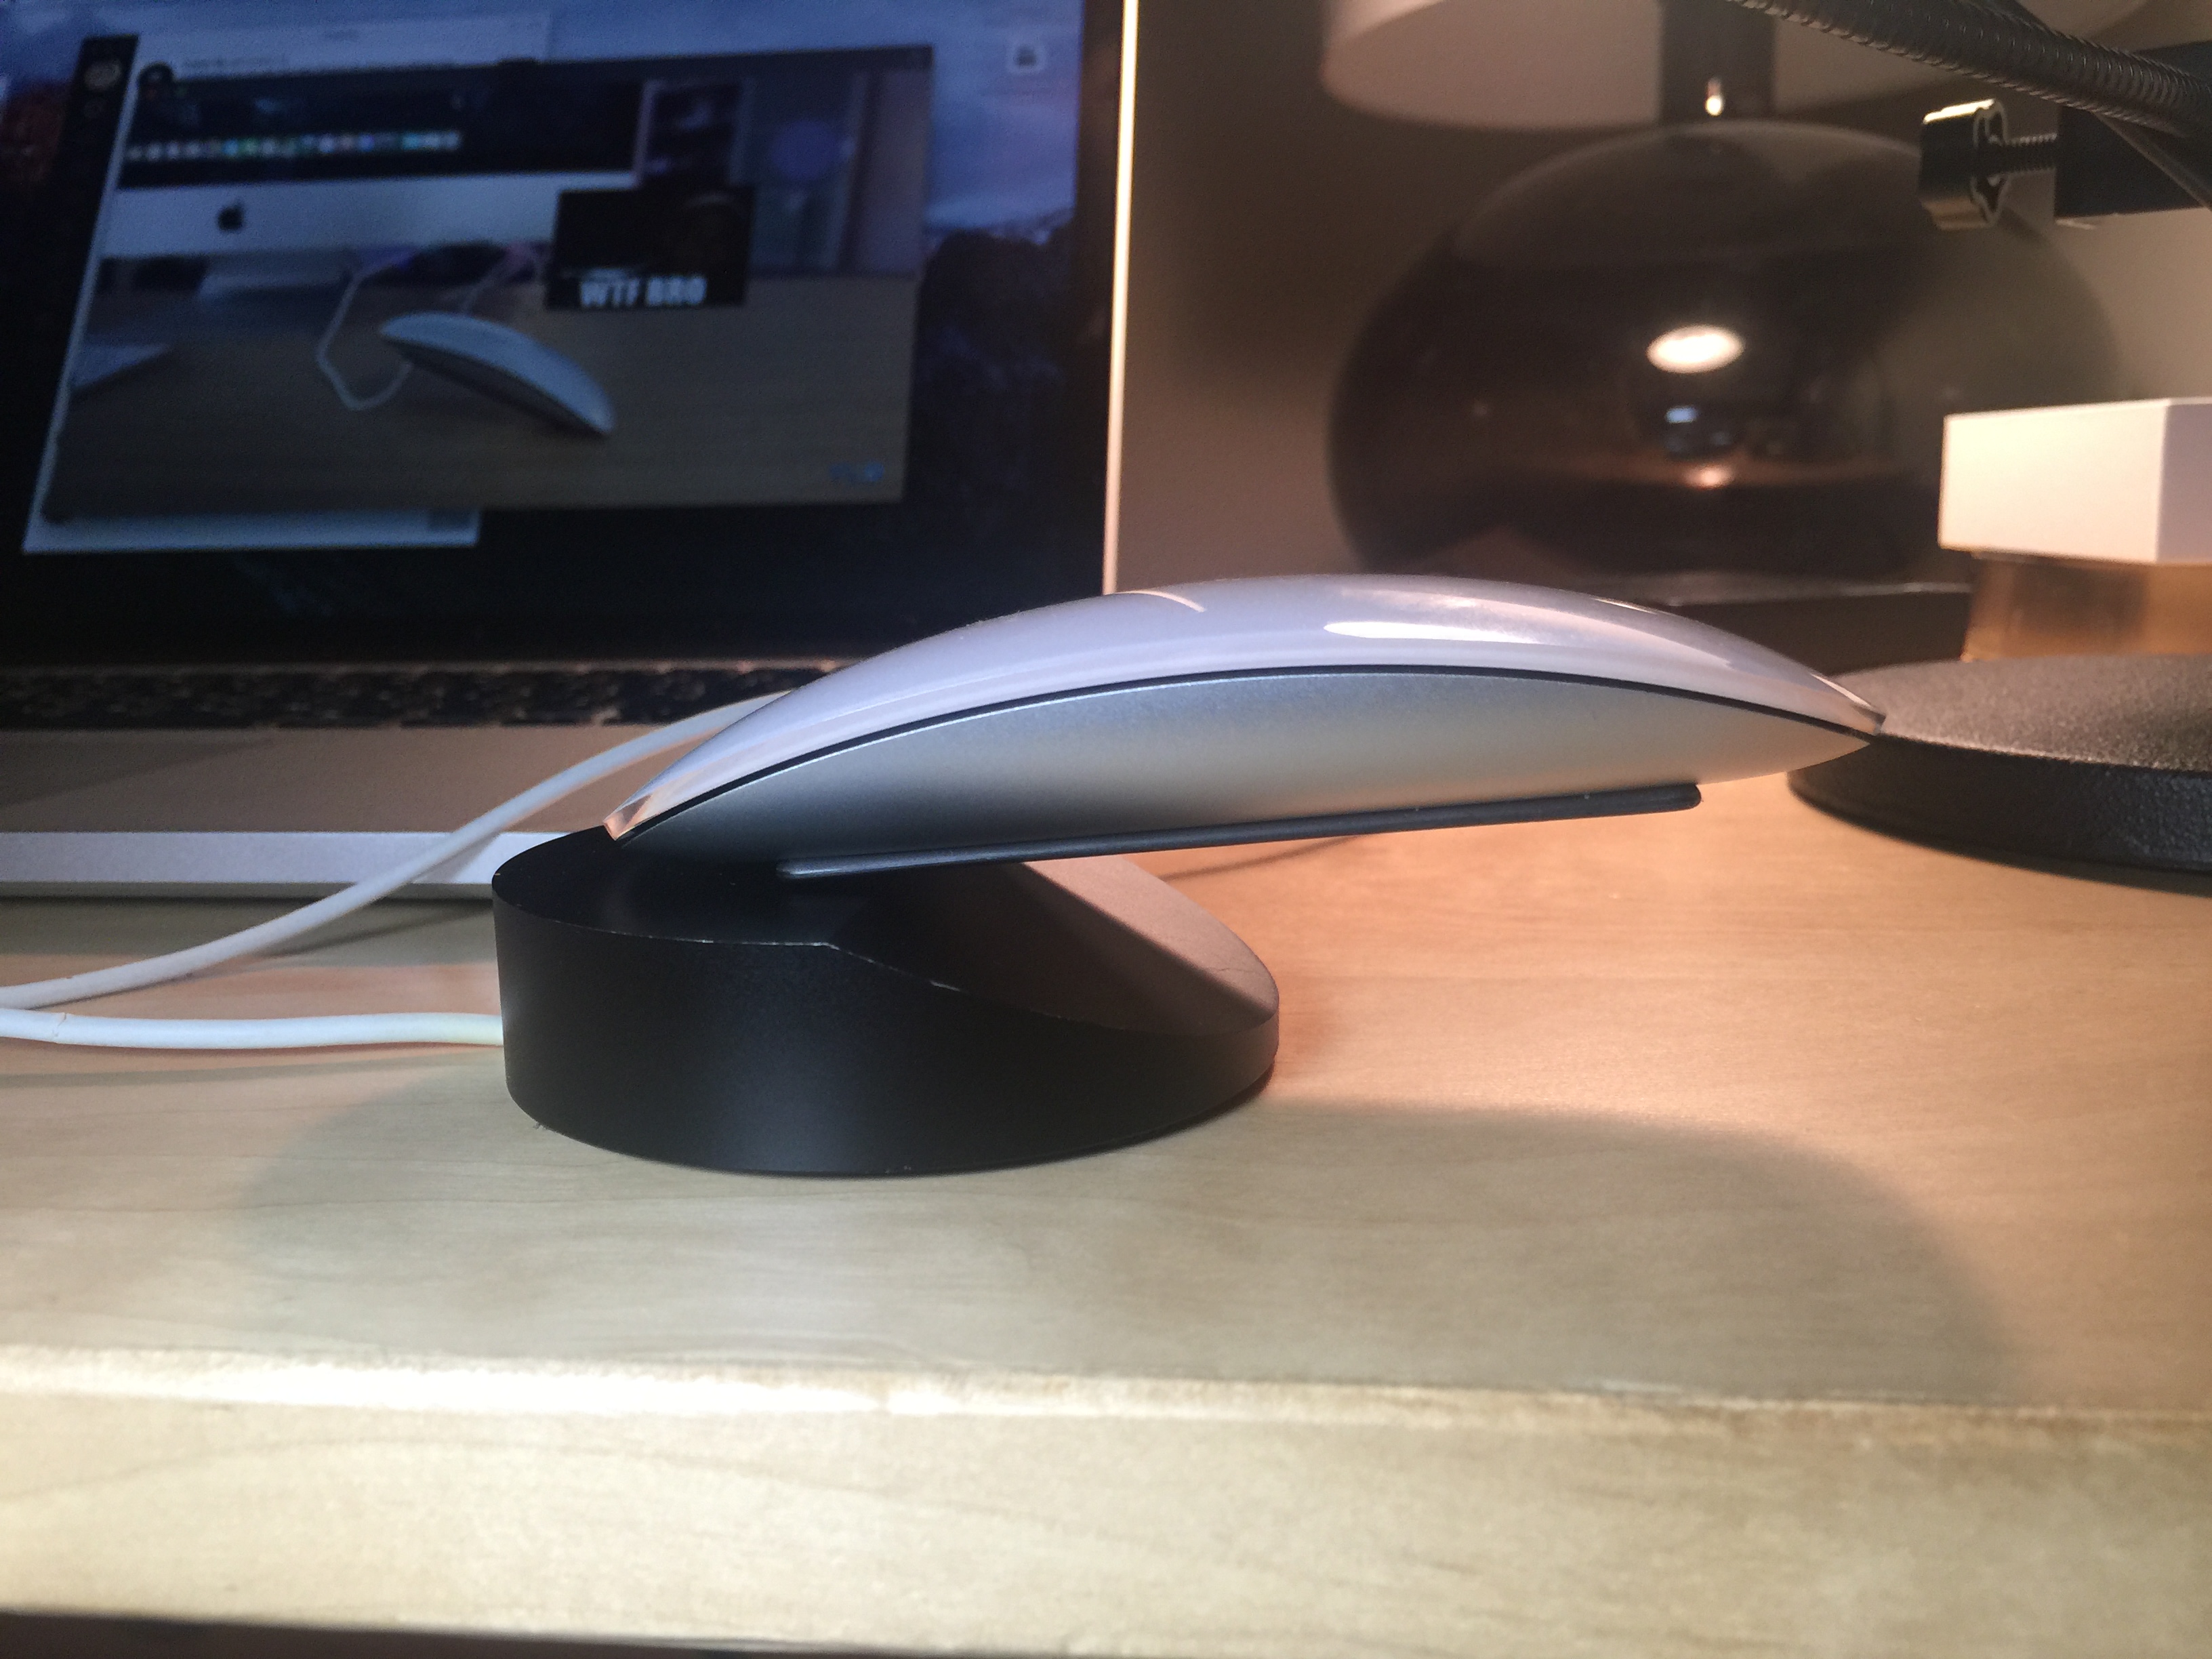 The Magic Mouse 2's Lightning port location isn't the problem it's being made out to be